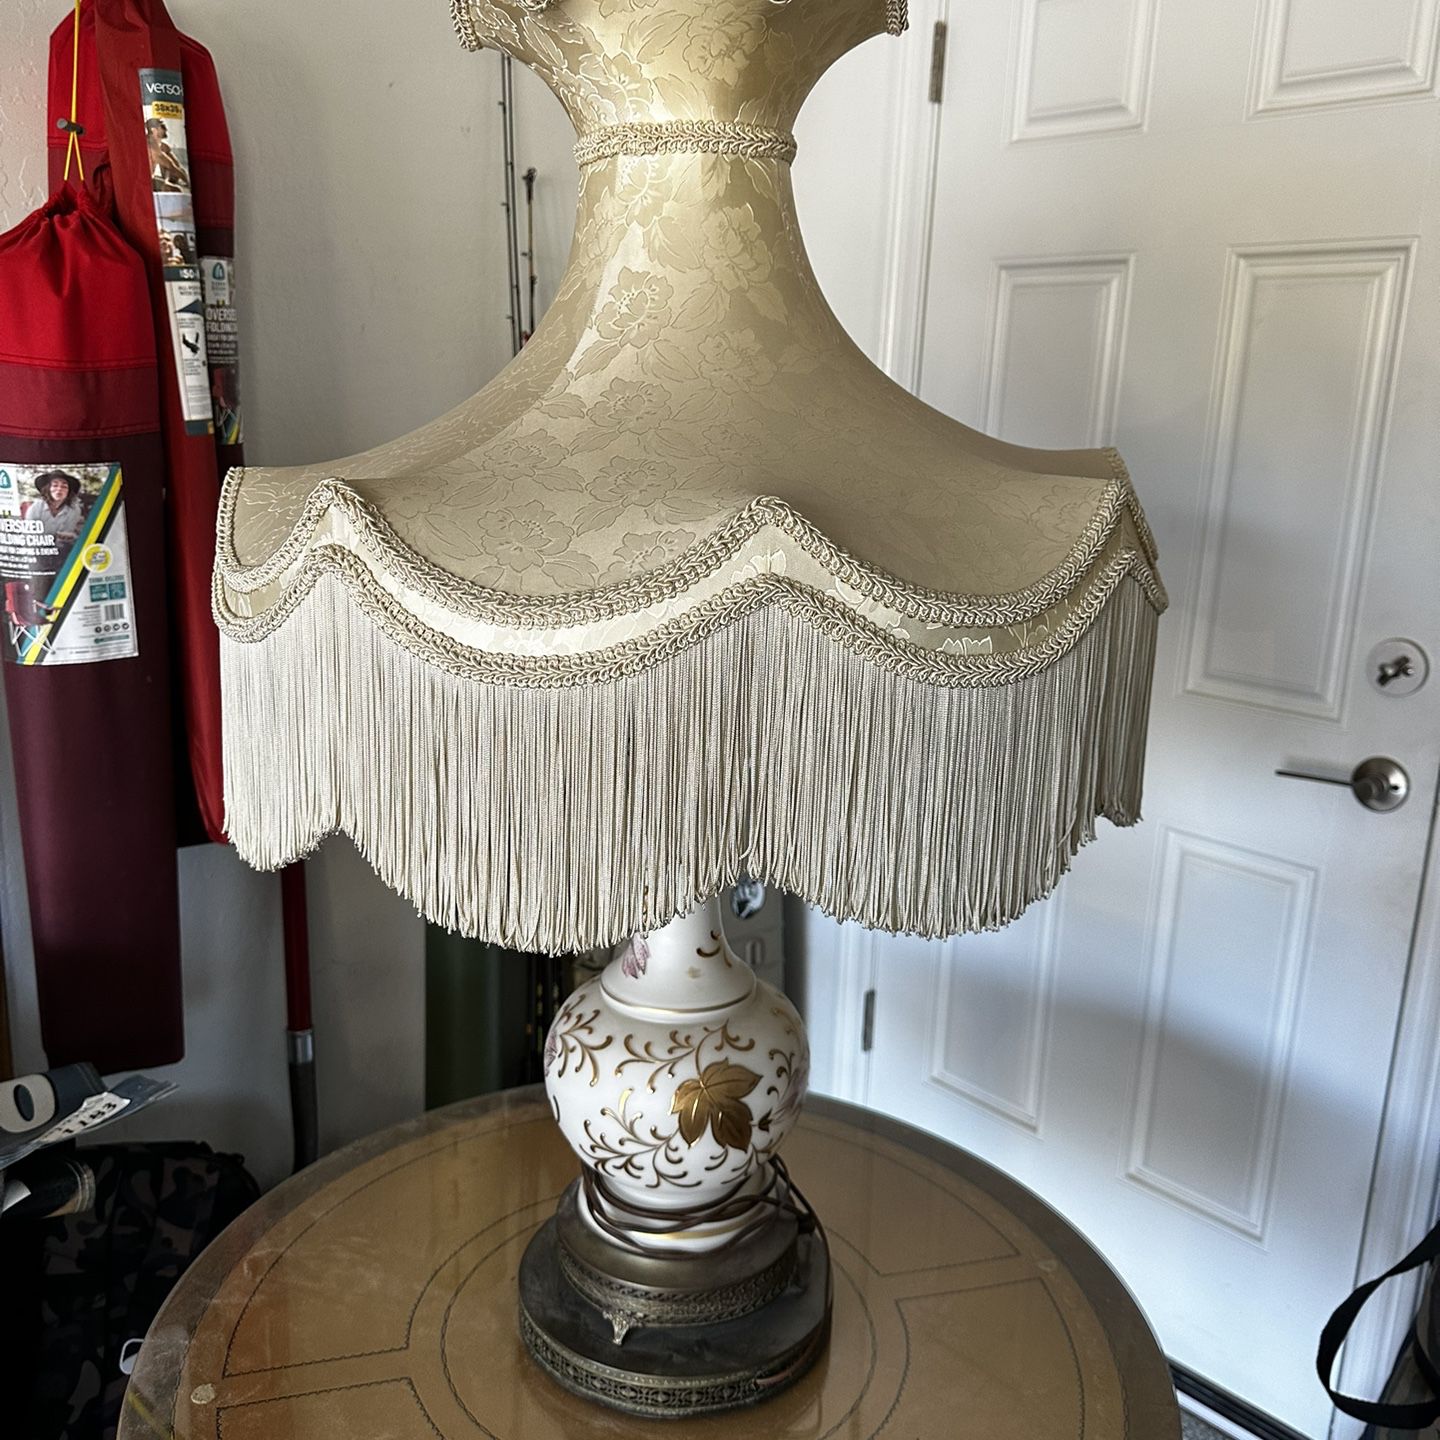 Antique Lamp And Side Table